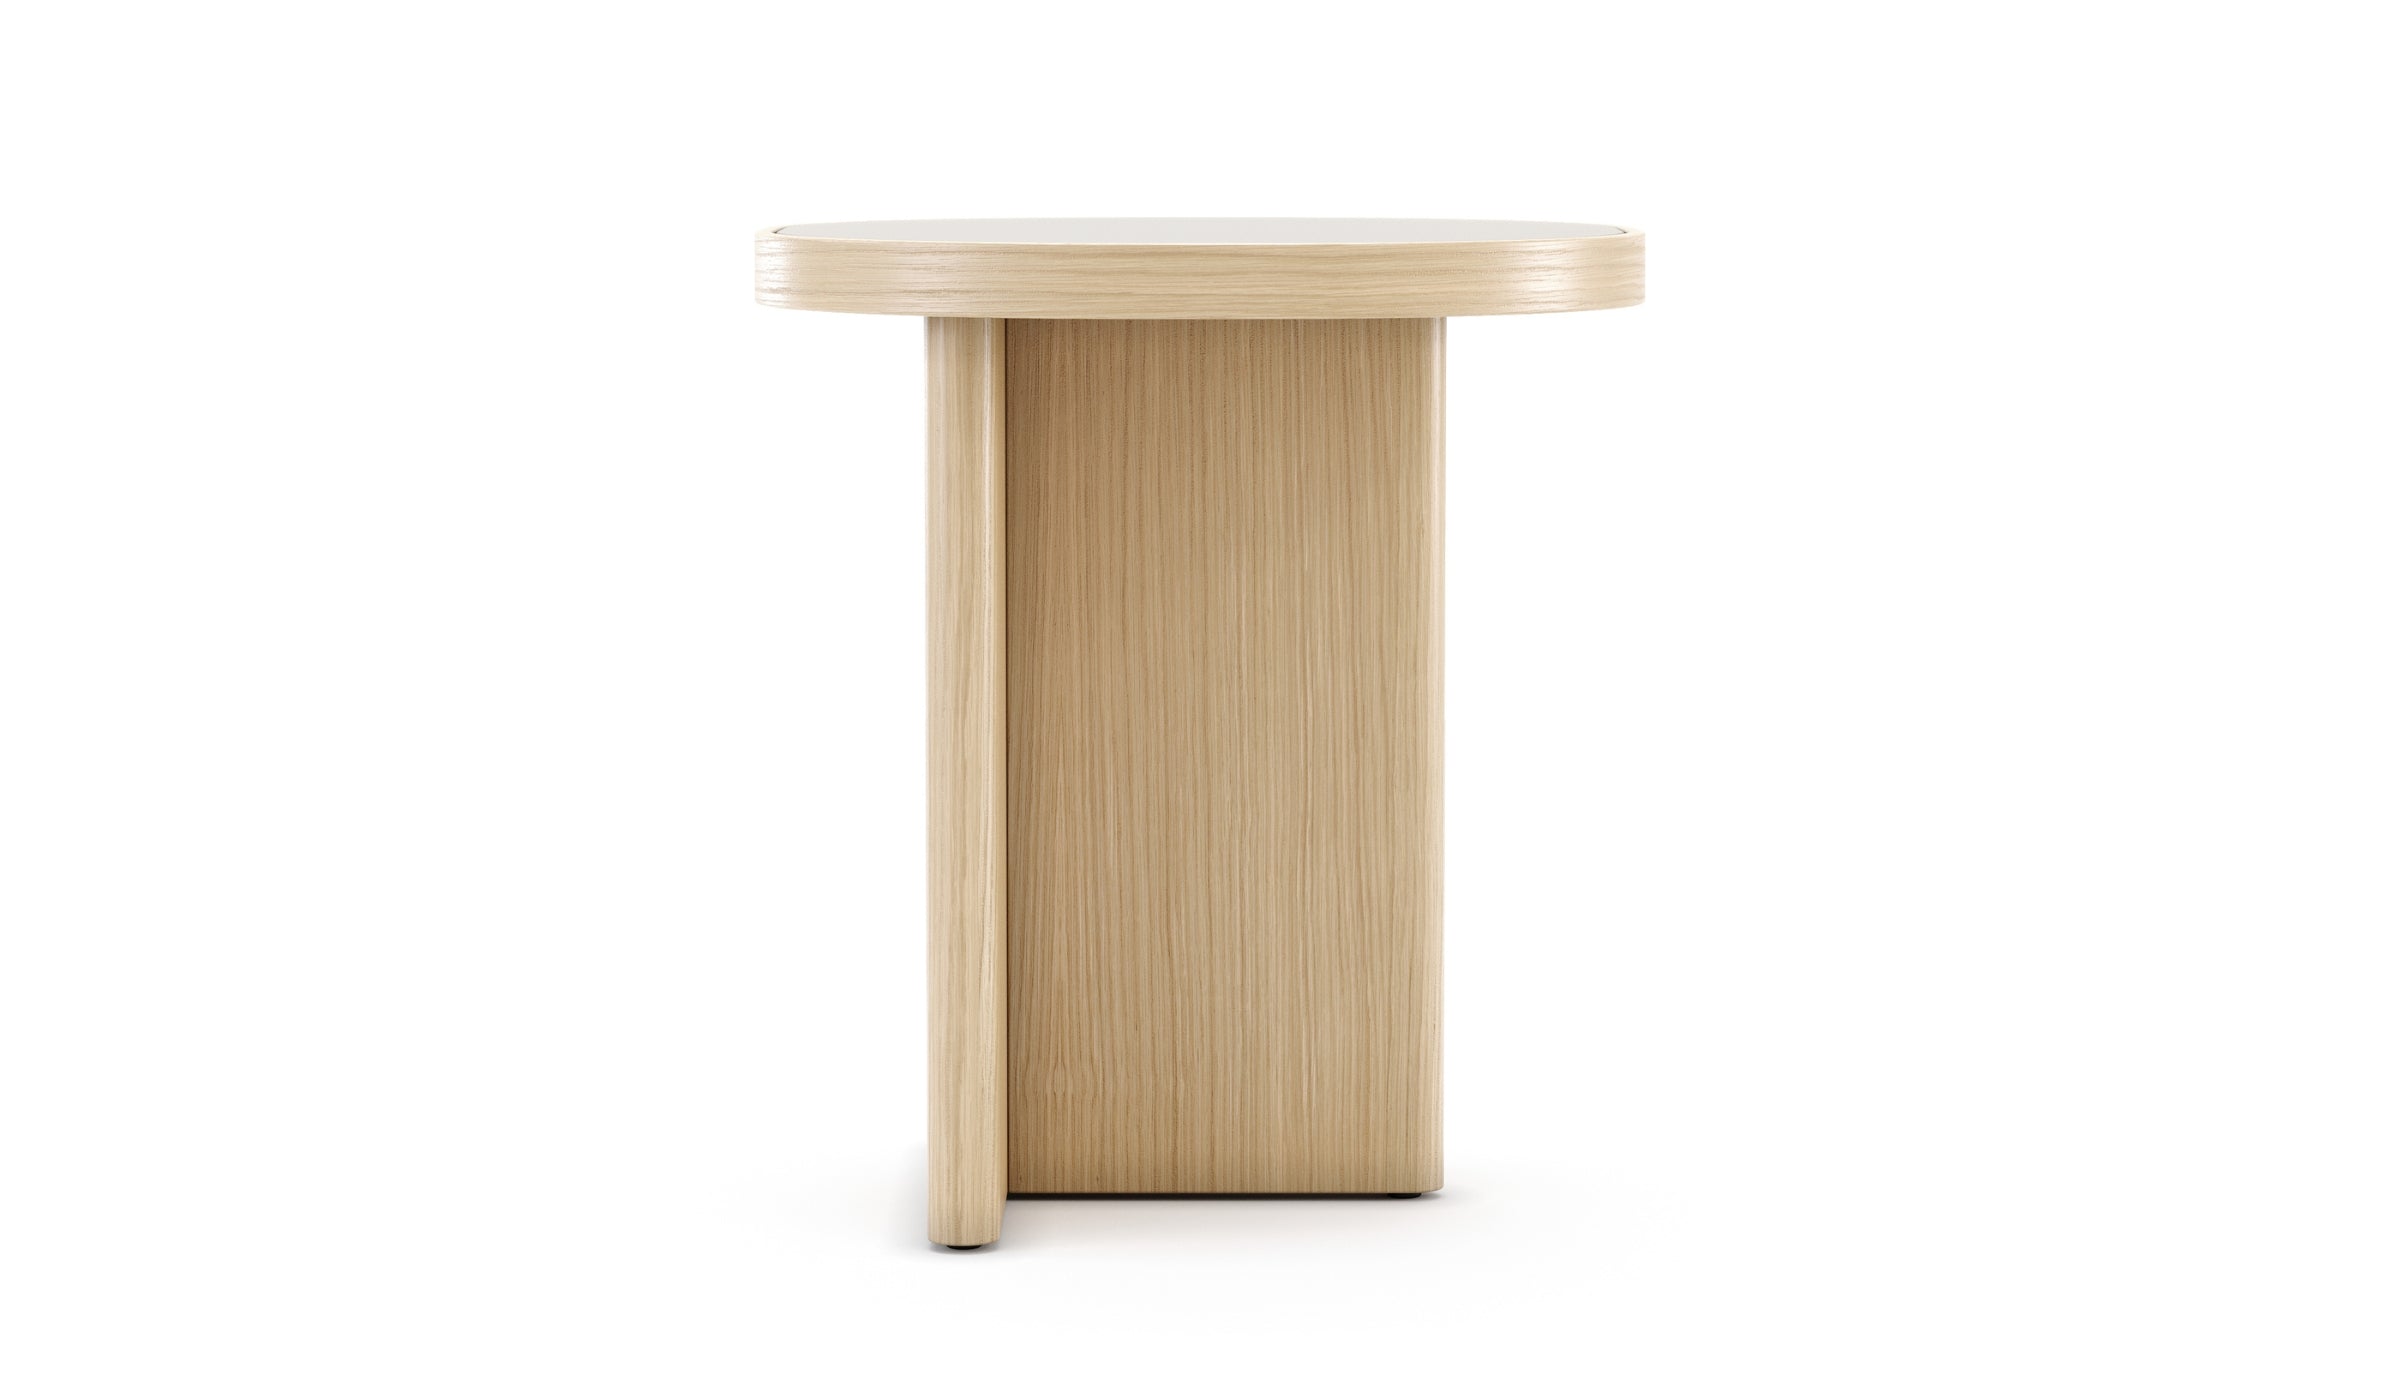 Gilbert - Table d'appoint, chêne naturel, laqué taupe, S